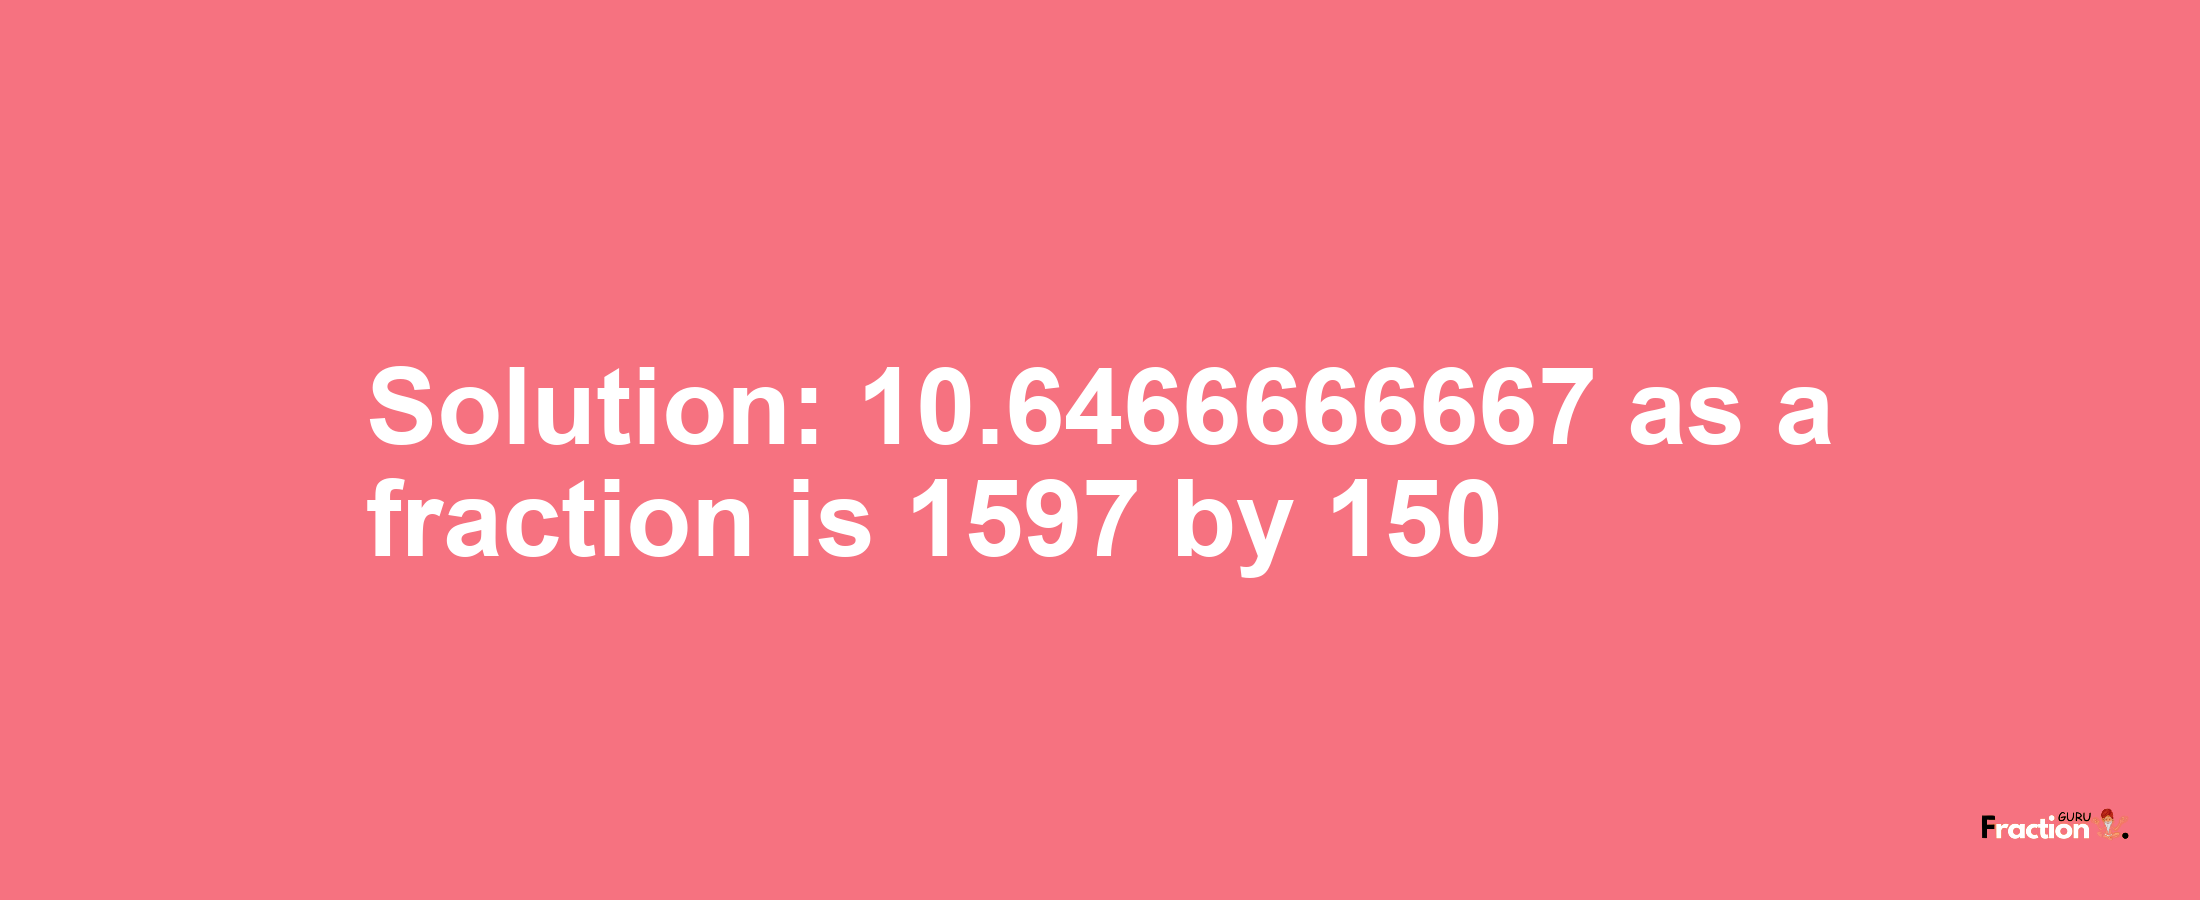 Solution:10.6466666667 as a fraction is 1597/150